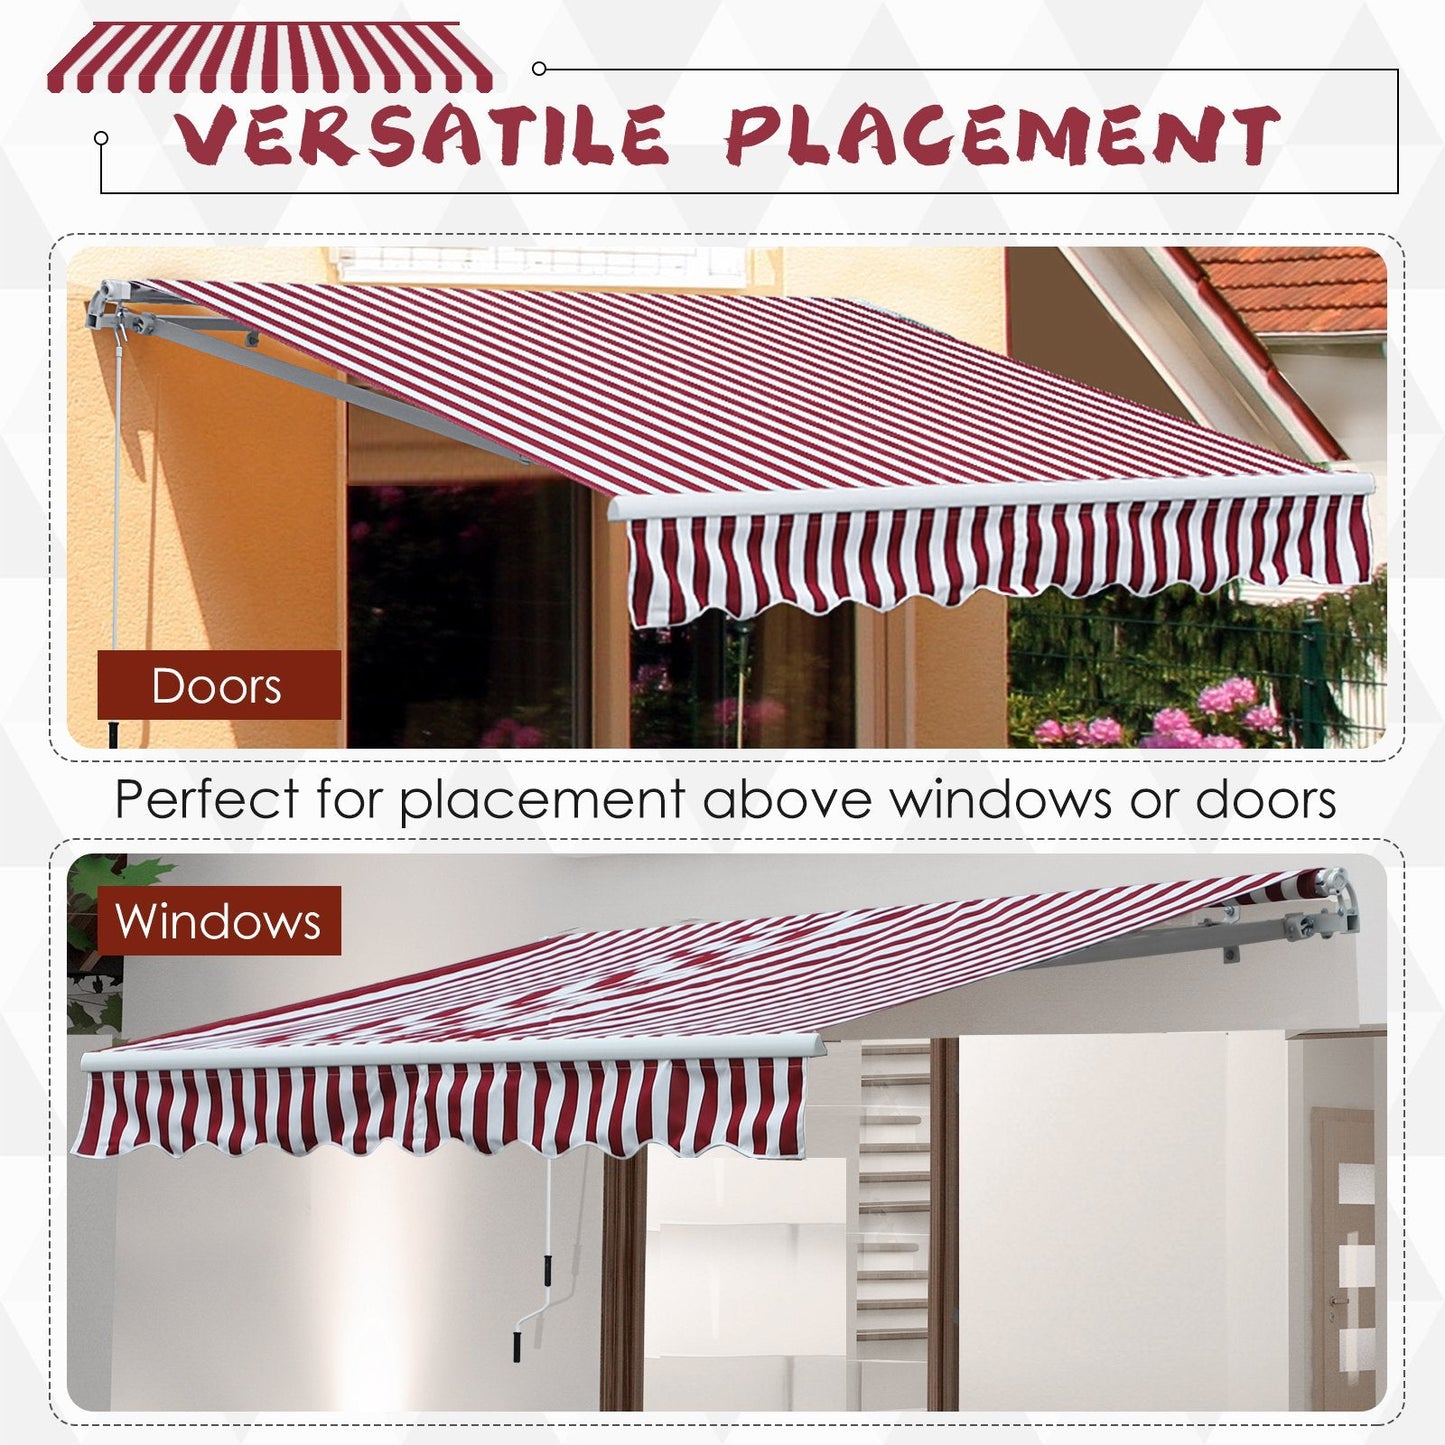 Outdoor and Garden-10' x 8' Manual Retractable Awning Sun Shade Shelter for Patio Deck Yard with UV Protection and Easy Crank Opening, Red Stripe - Outdoor Style Company